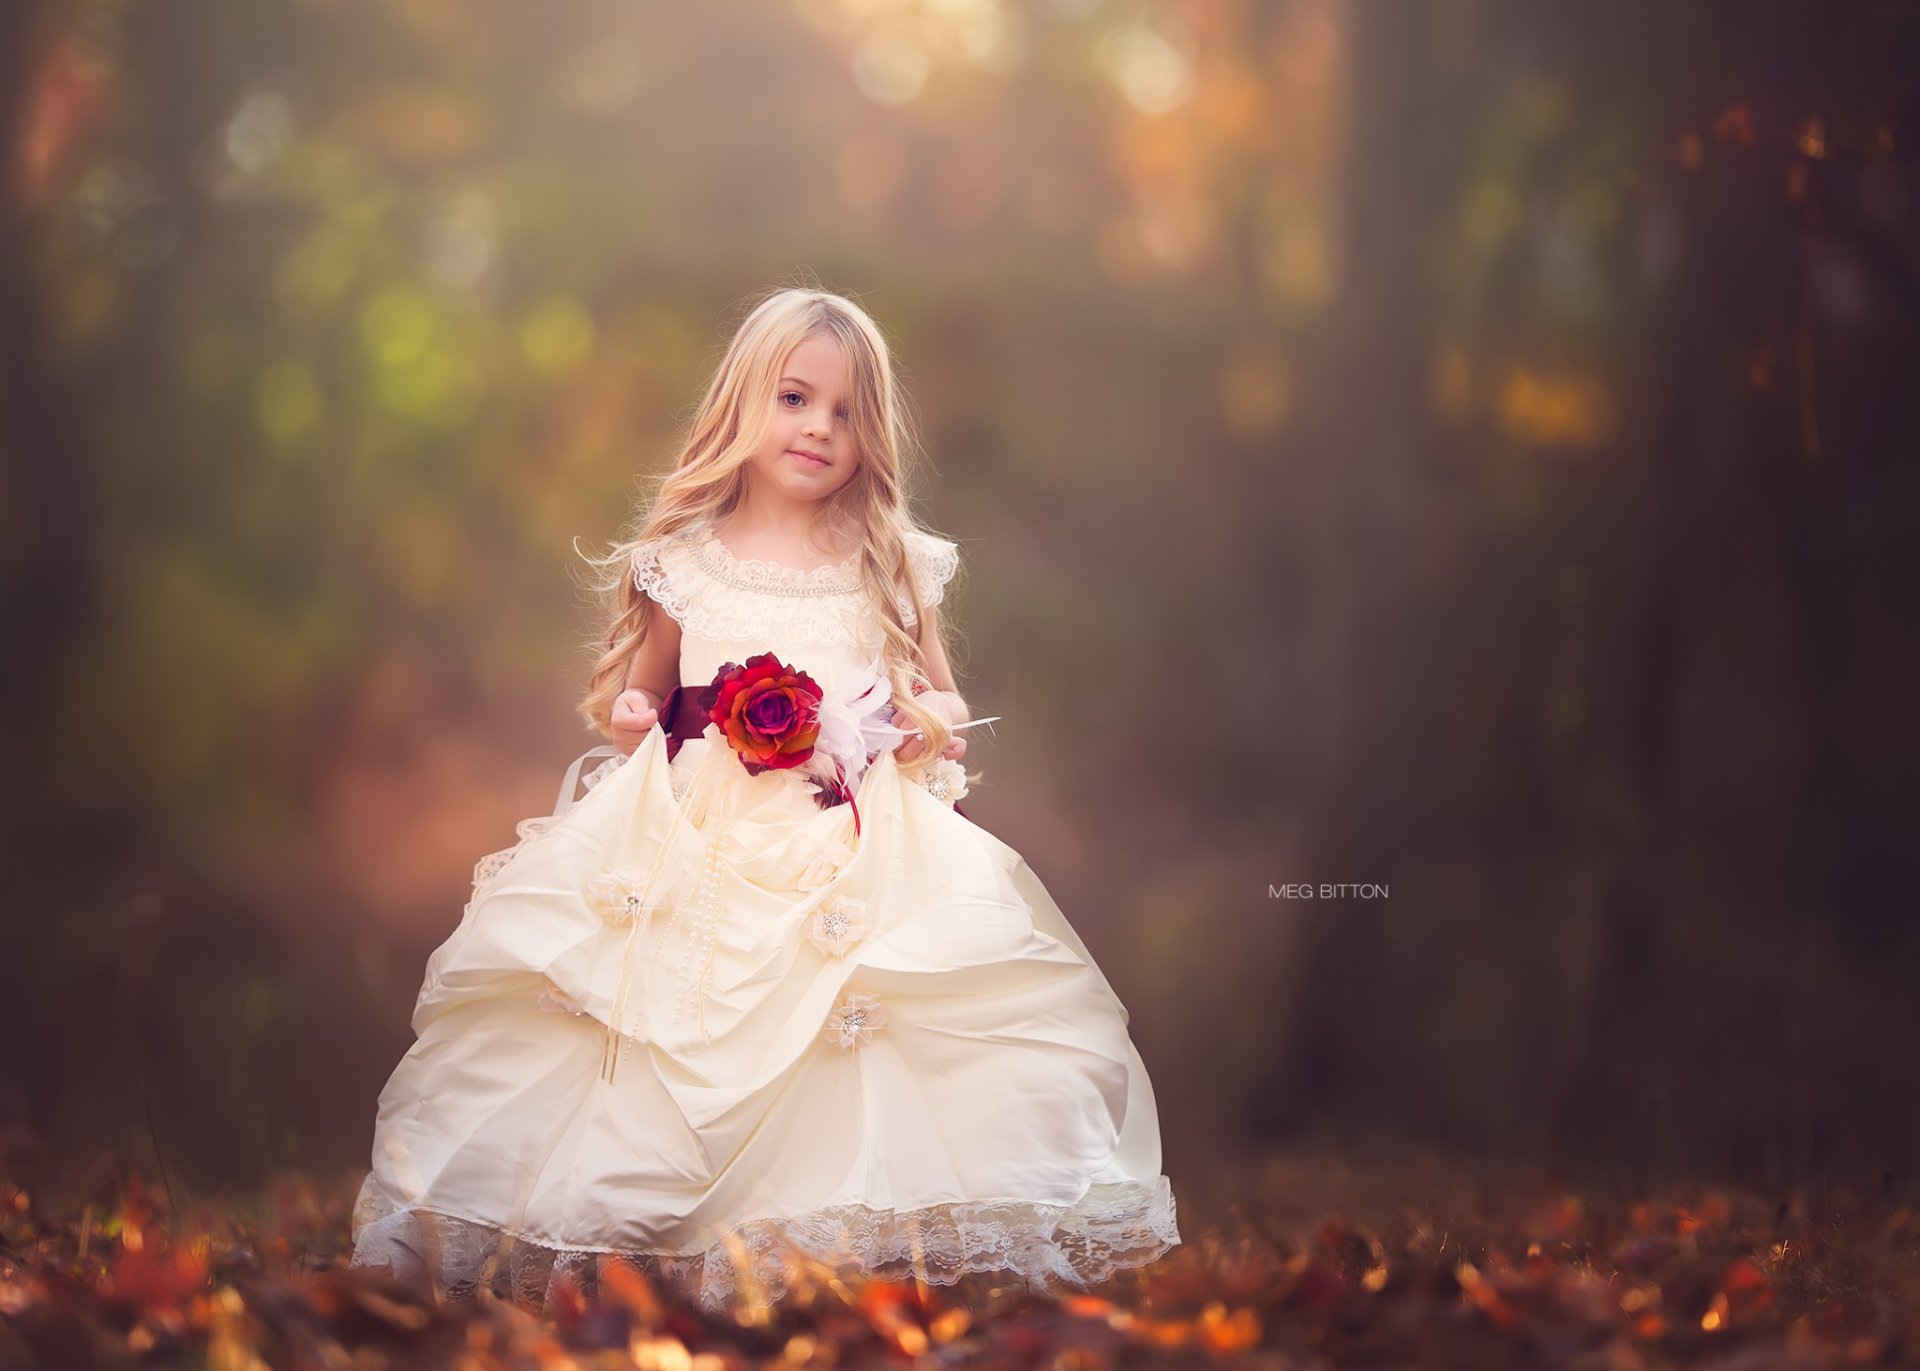 Cute Little Girl with Rose by Meg Bitton